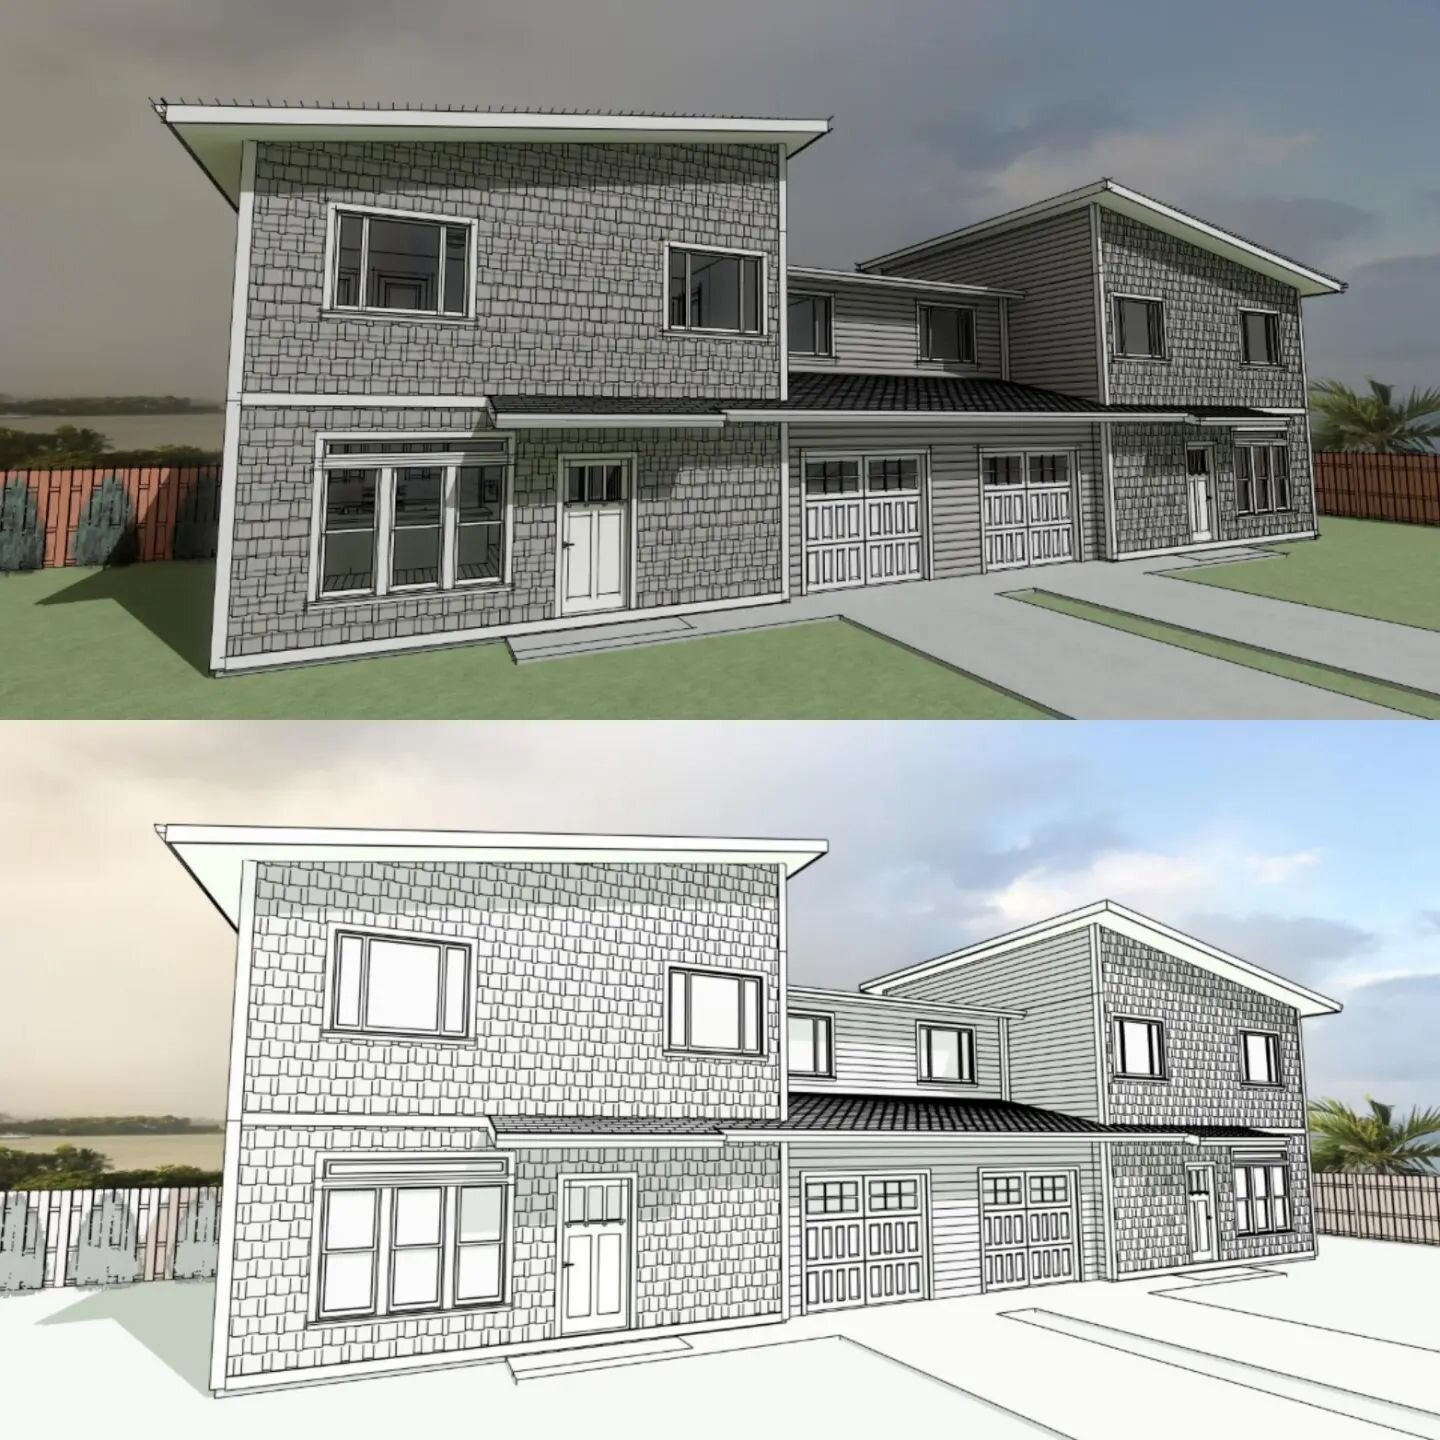 New set of duplexes out in Ocean Shores, Washington

#oceanshores #wabeaches #oceanshoreswa #duplex #duplexhouse #rentalproperty #3dmodeling #3dvisualization #homedesigns #architecture #design #chiefarchitect